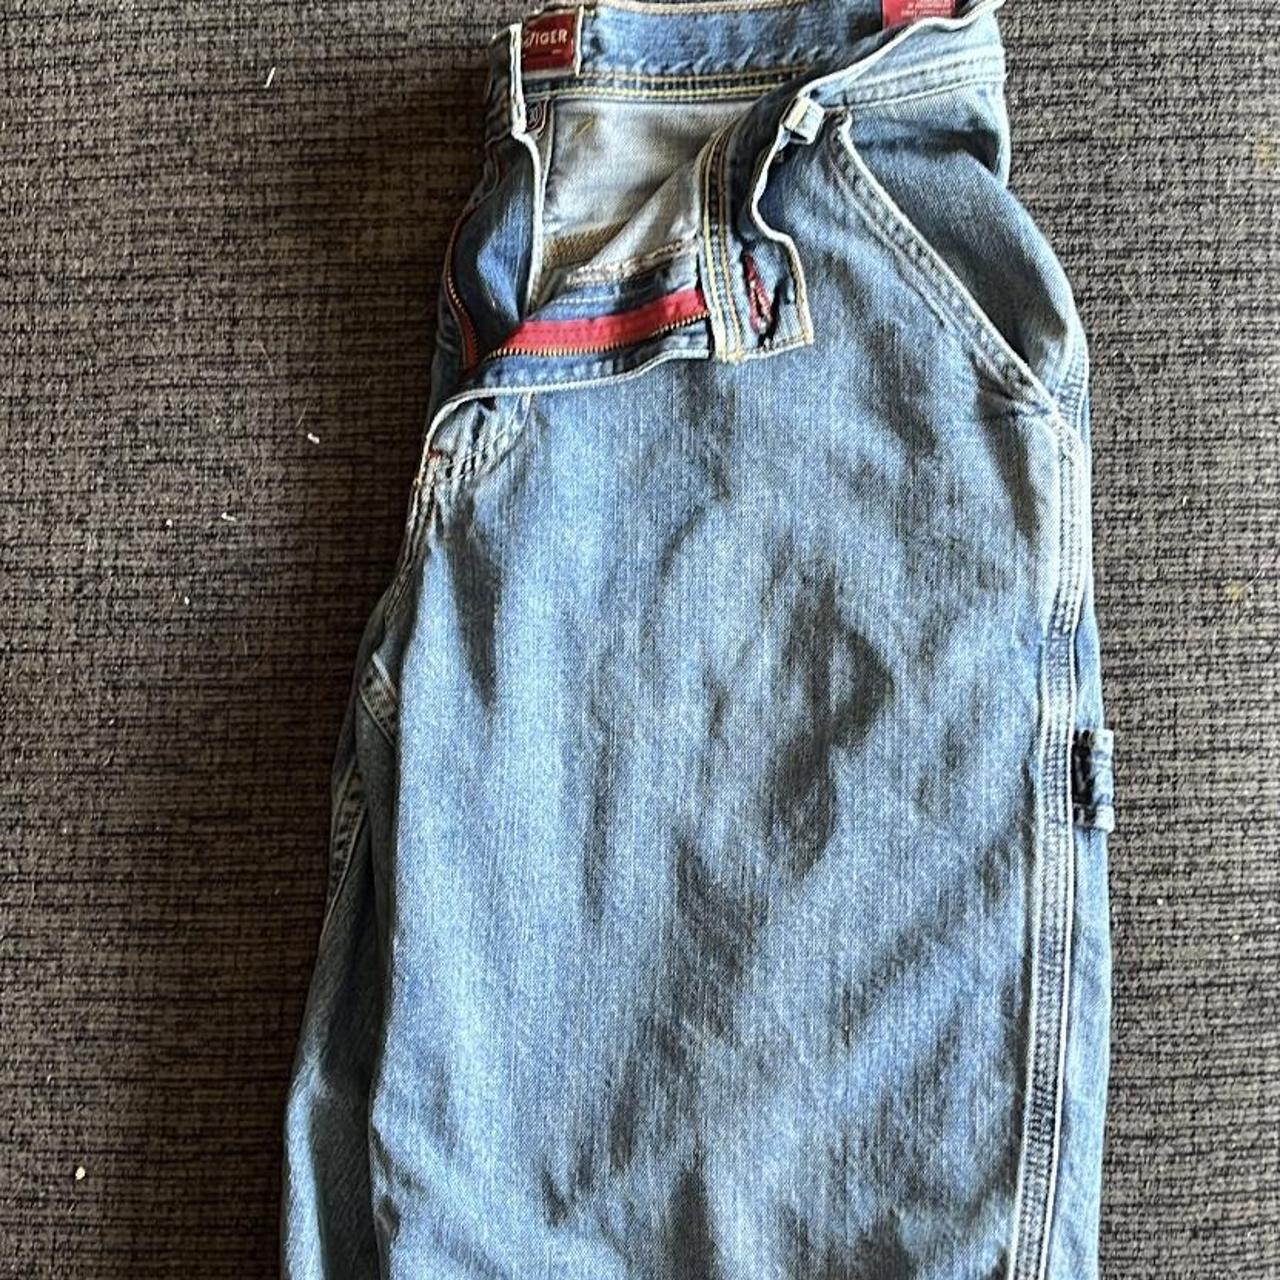 Product Image 3 - Hilfiger Jorts
Lightly worn, no stains